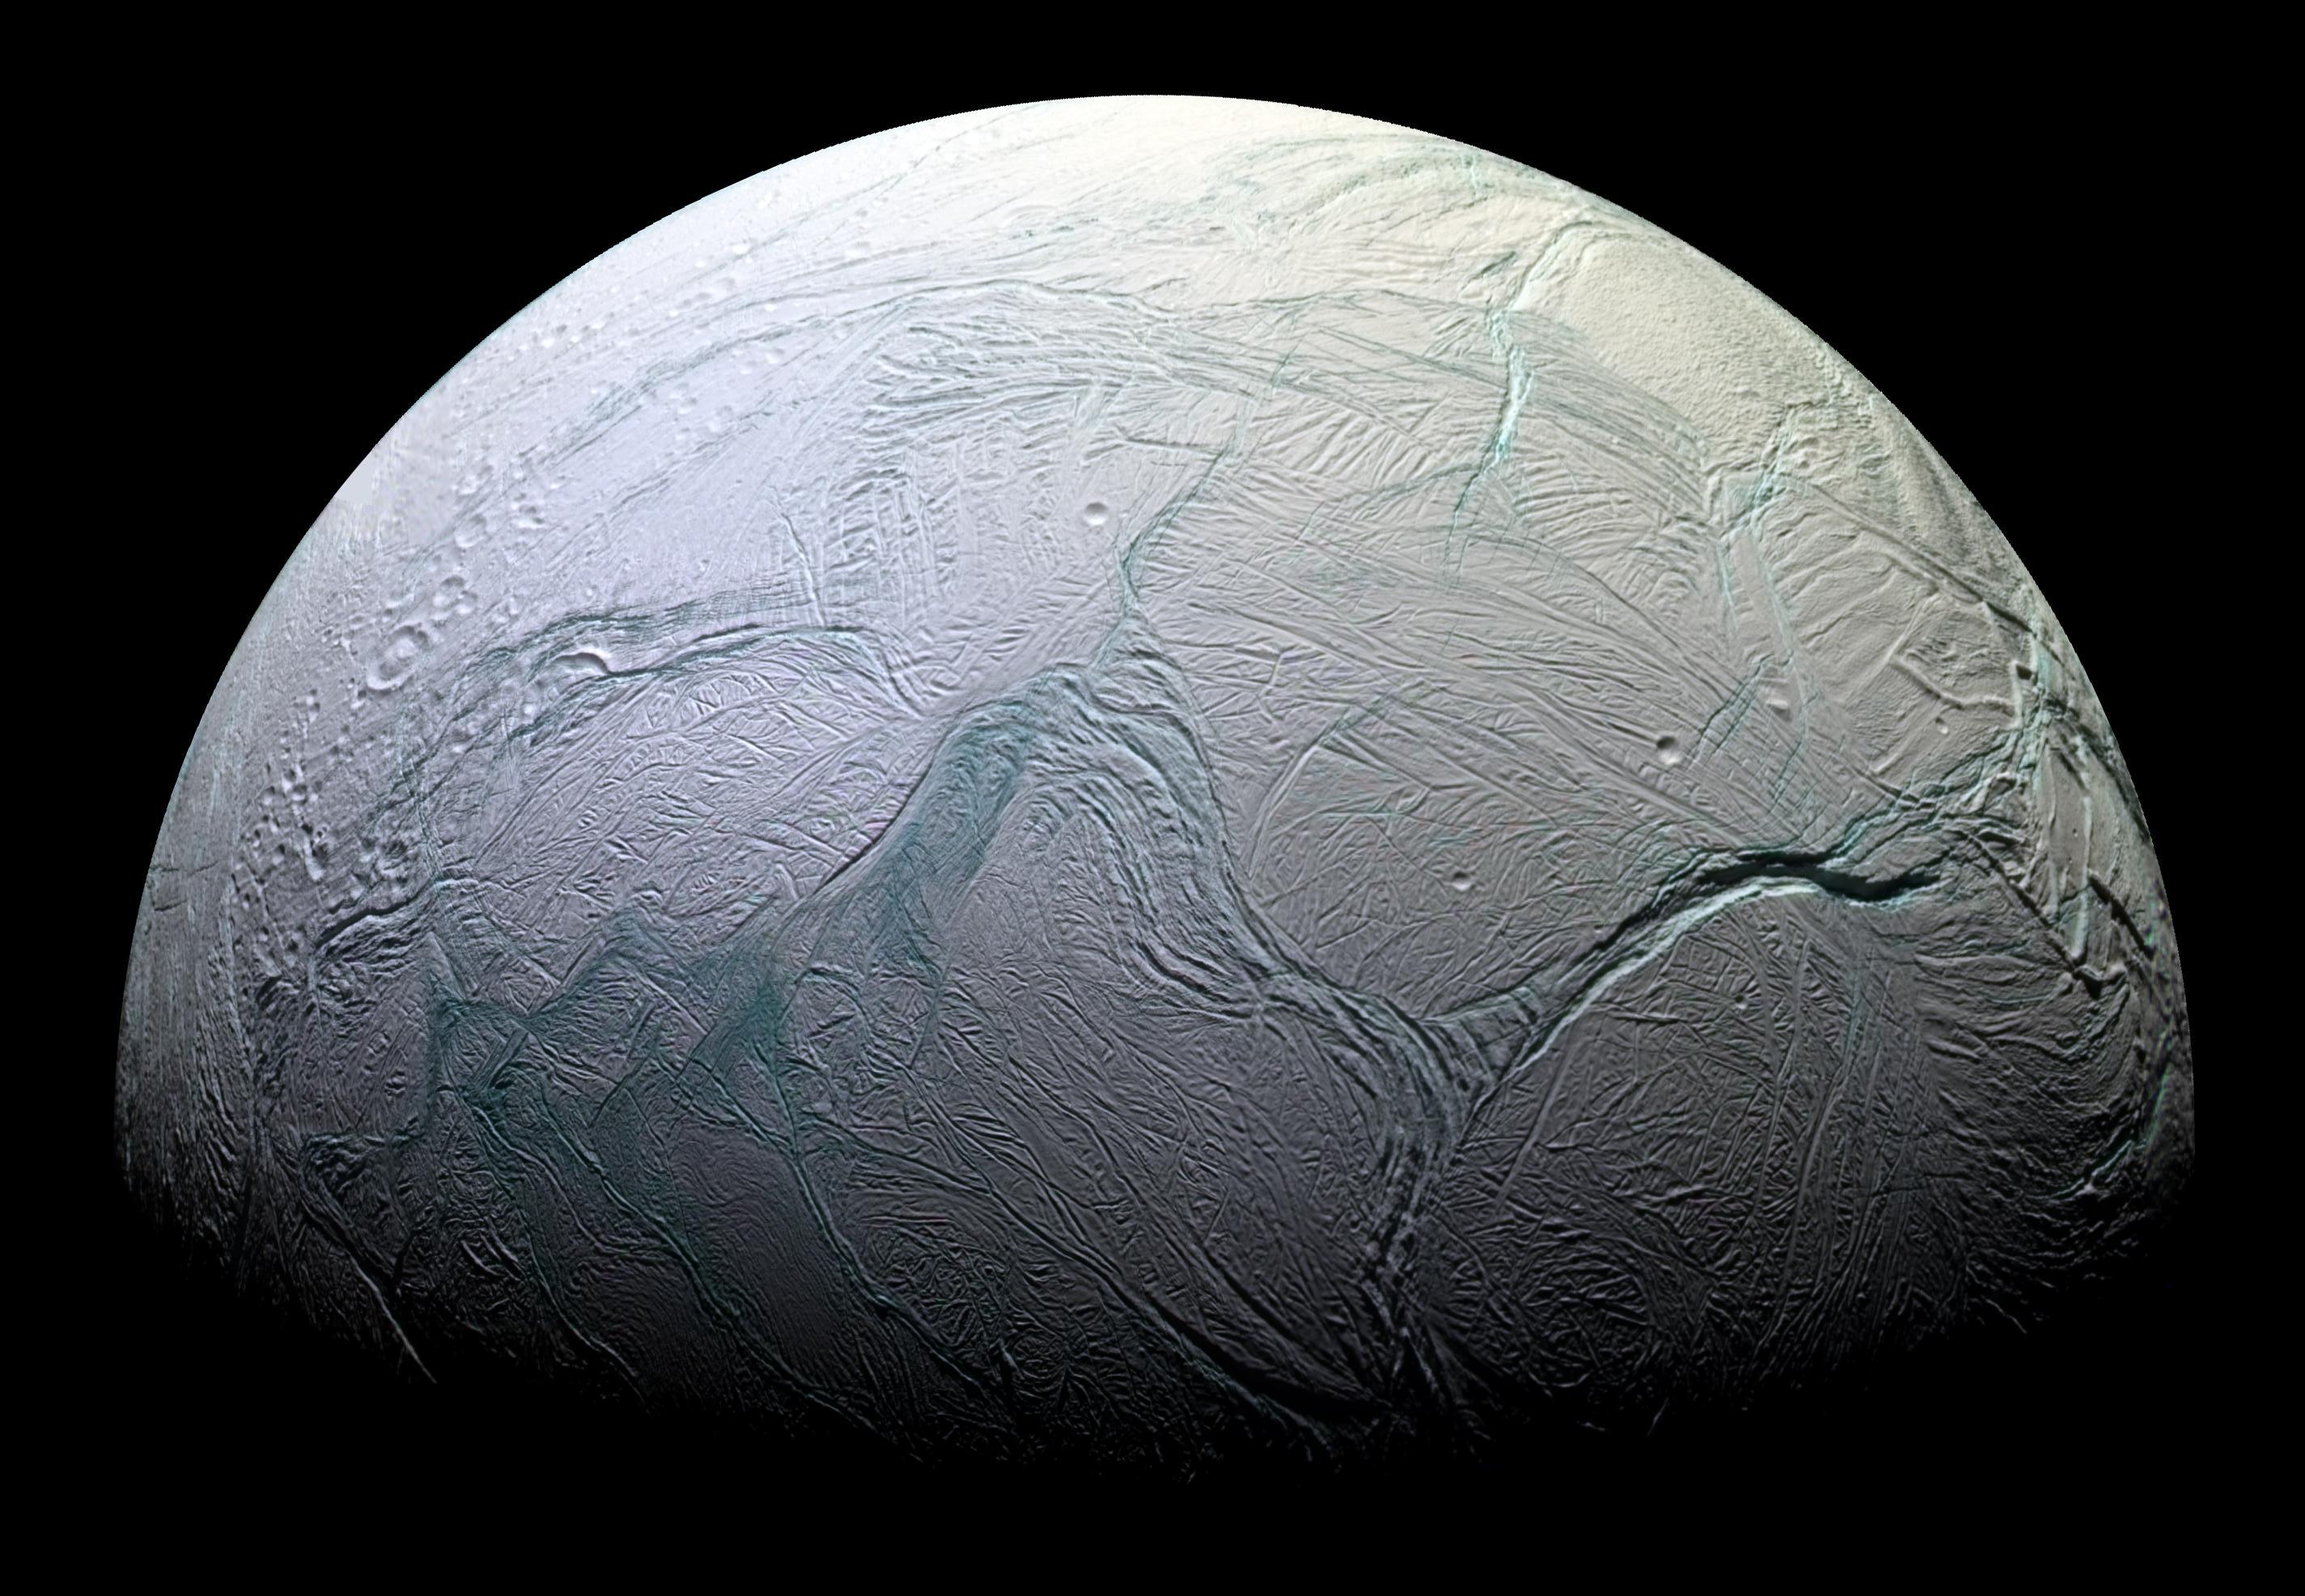 NASA scientists quietly announce that Enceladus, a Saturn moon, can support life